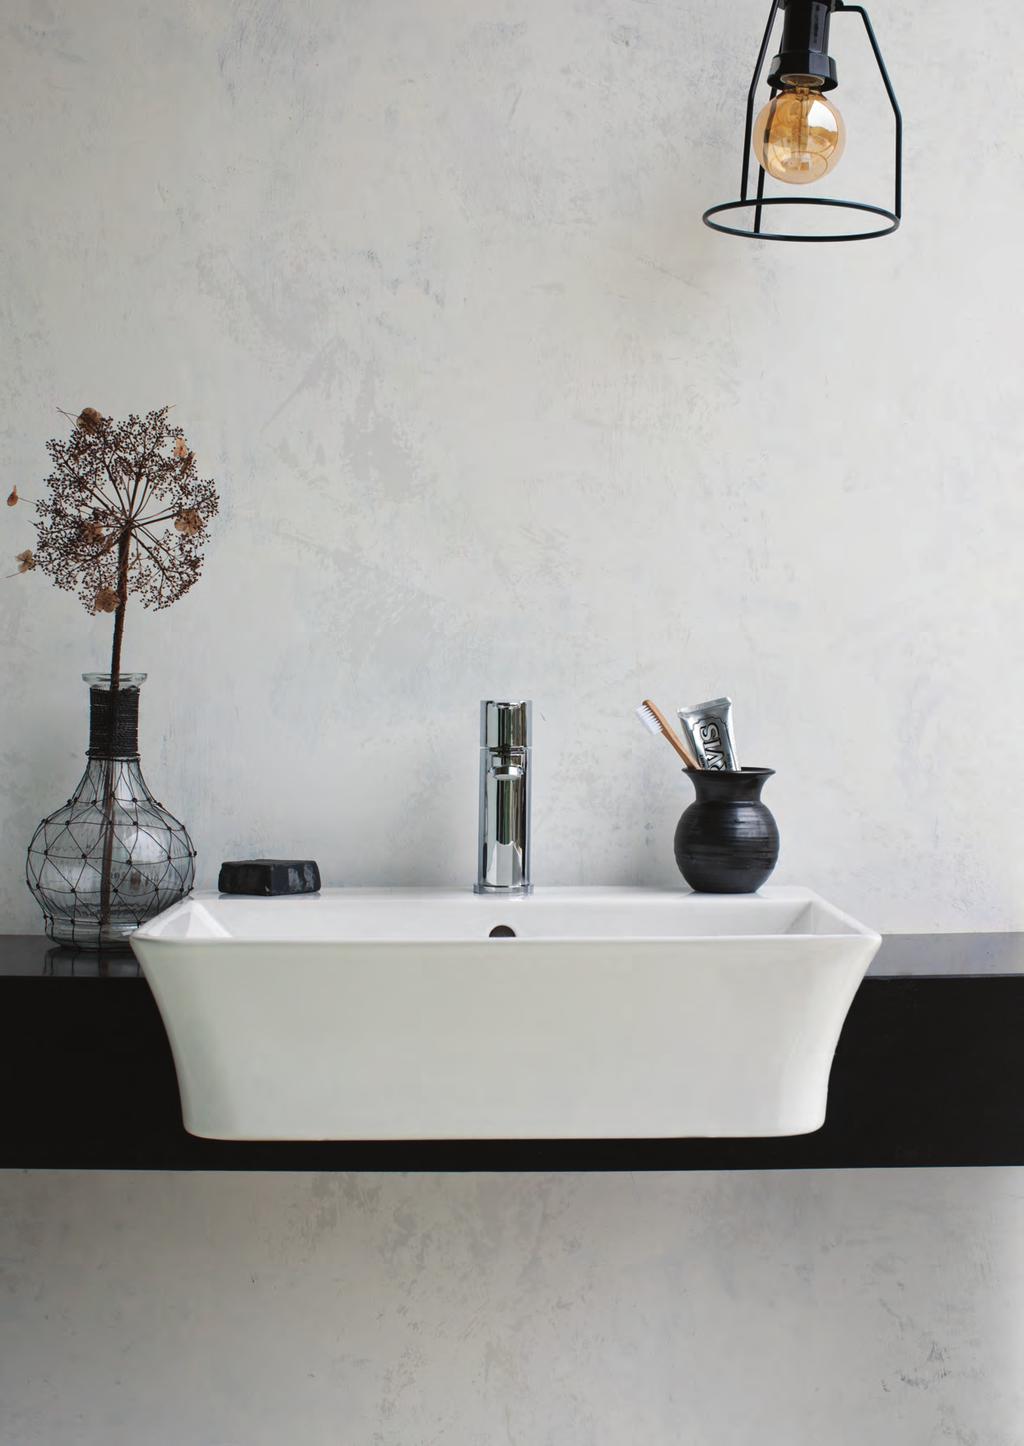 tailor your bathroom to suit your own individual tastes.